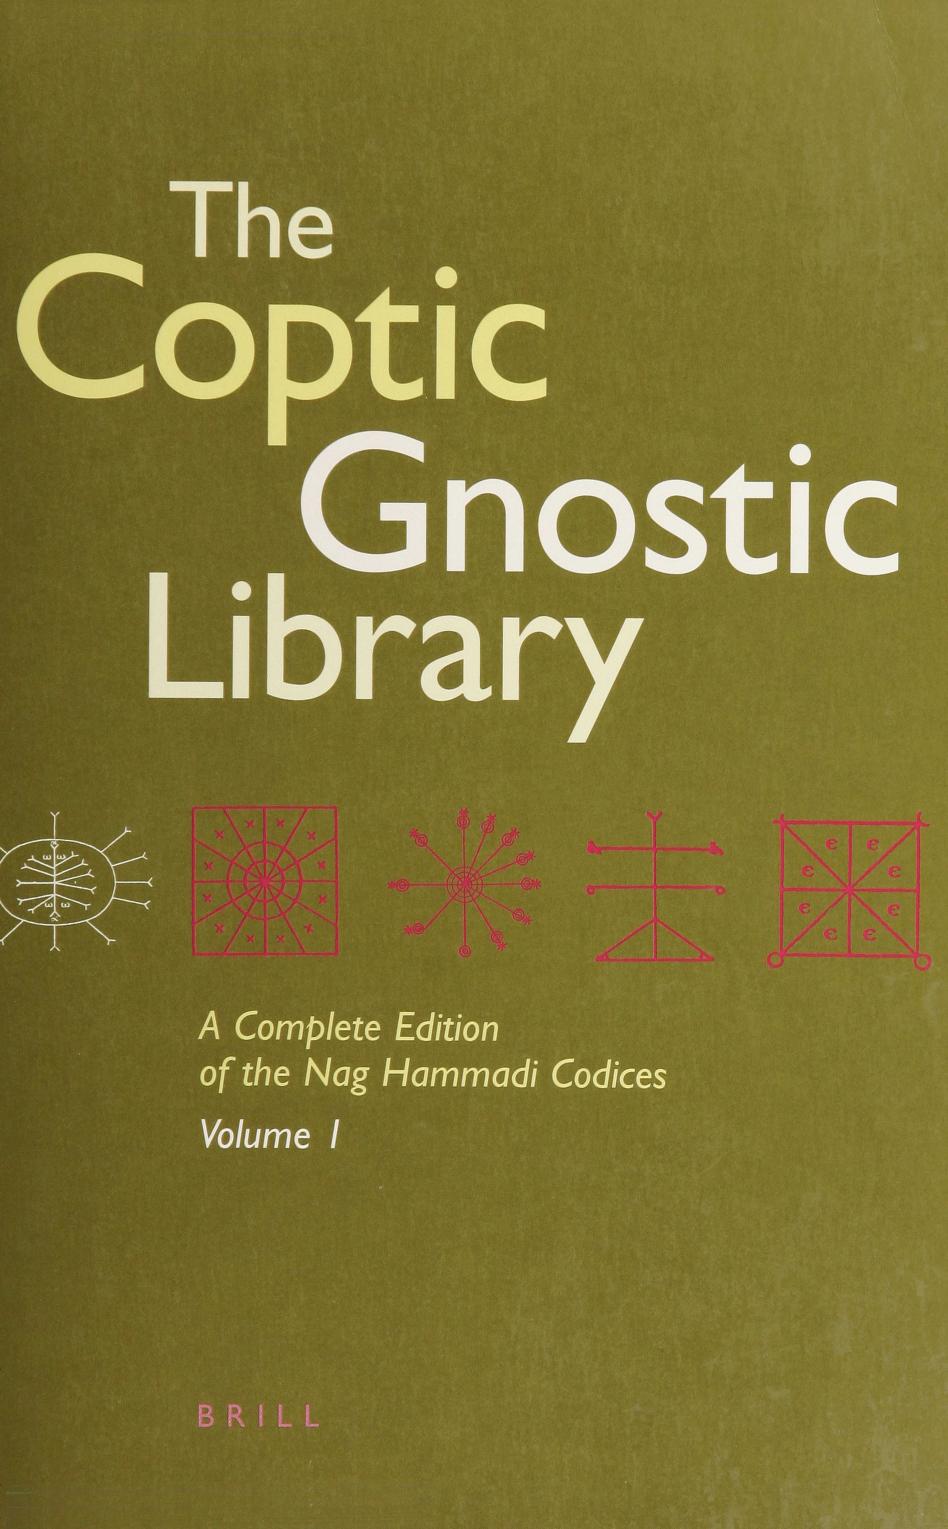 The Coptic Gnostic Library A Complete Edition of the Nag Hammadi Codices Volume 1